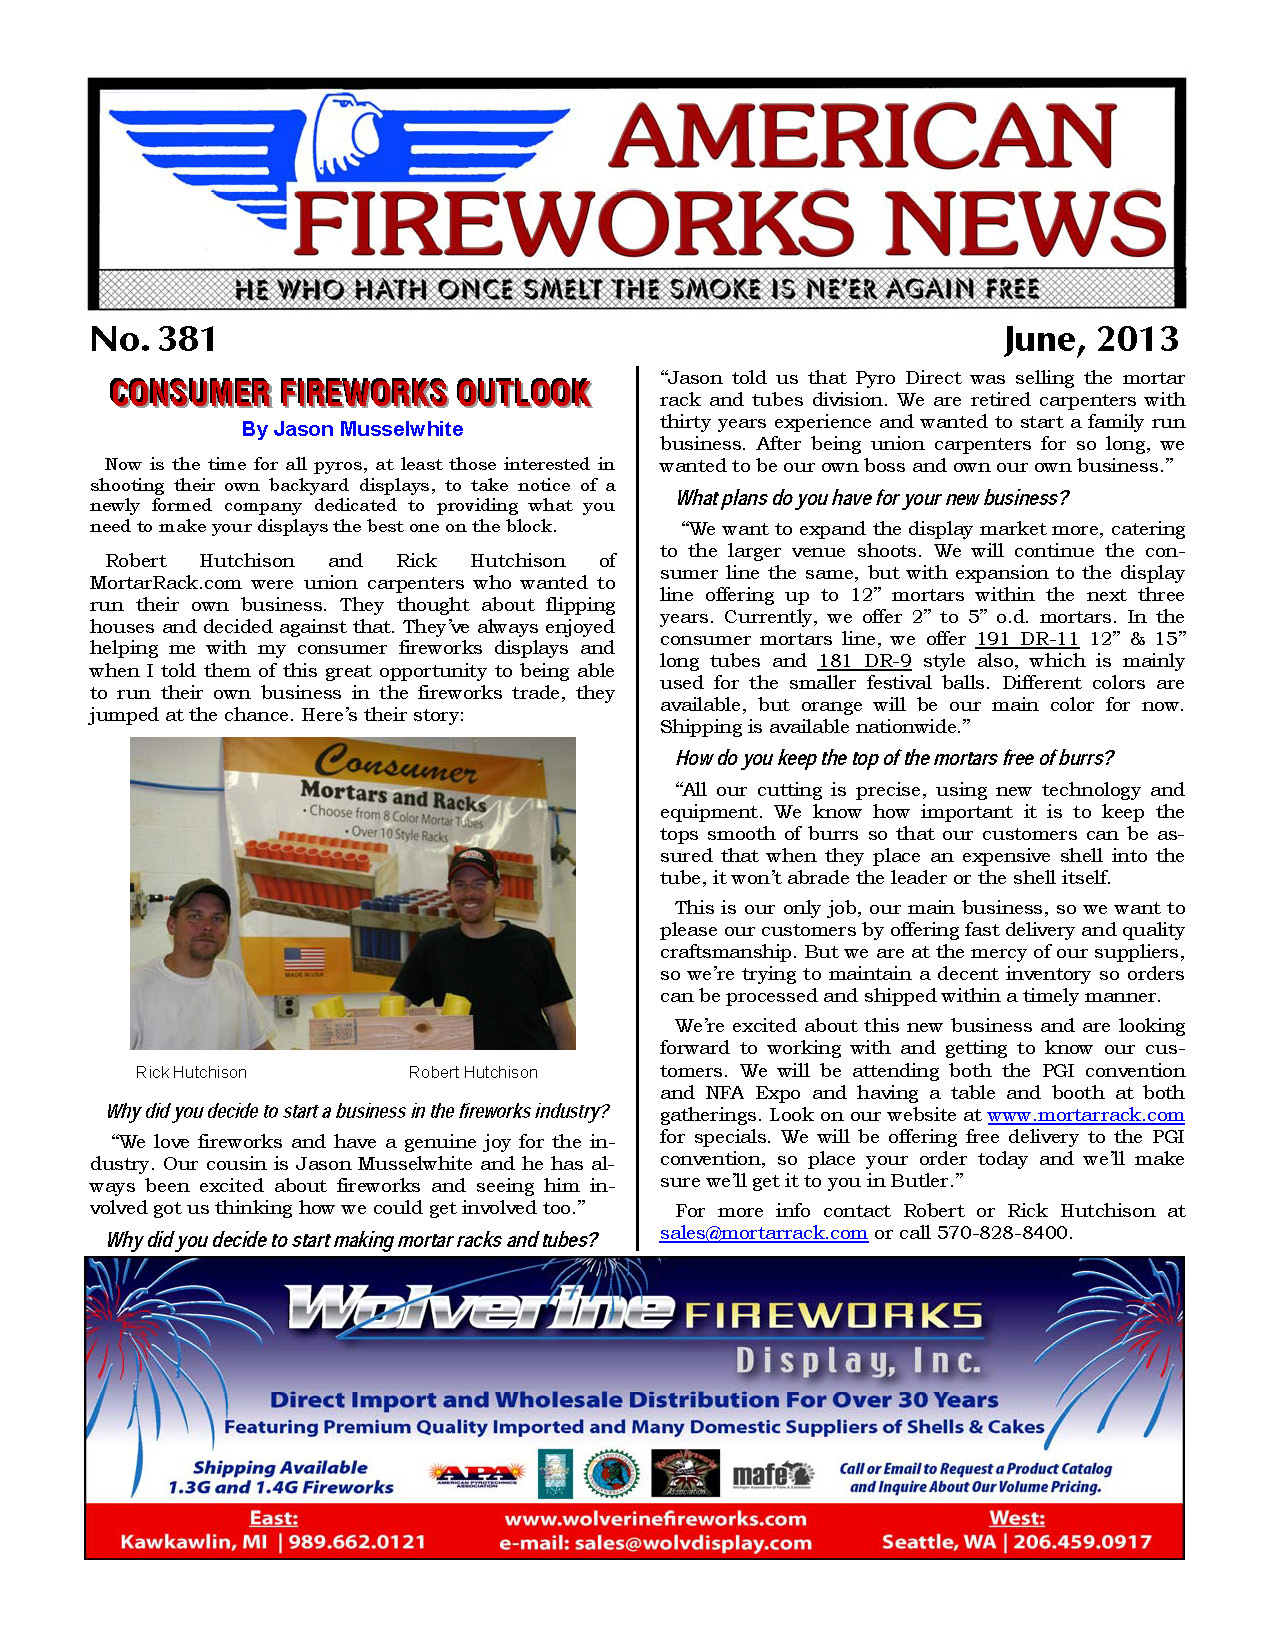 S1E 2015 - American Fireworks News newsletter all 12 issues for 2015